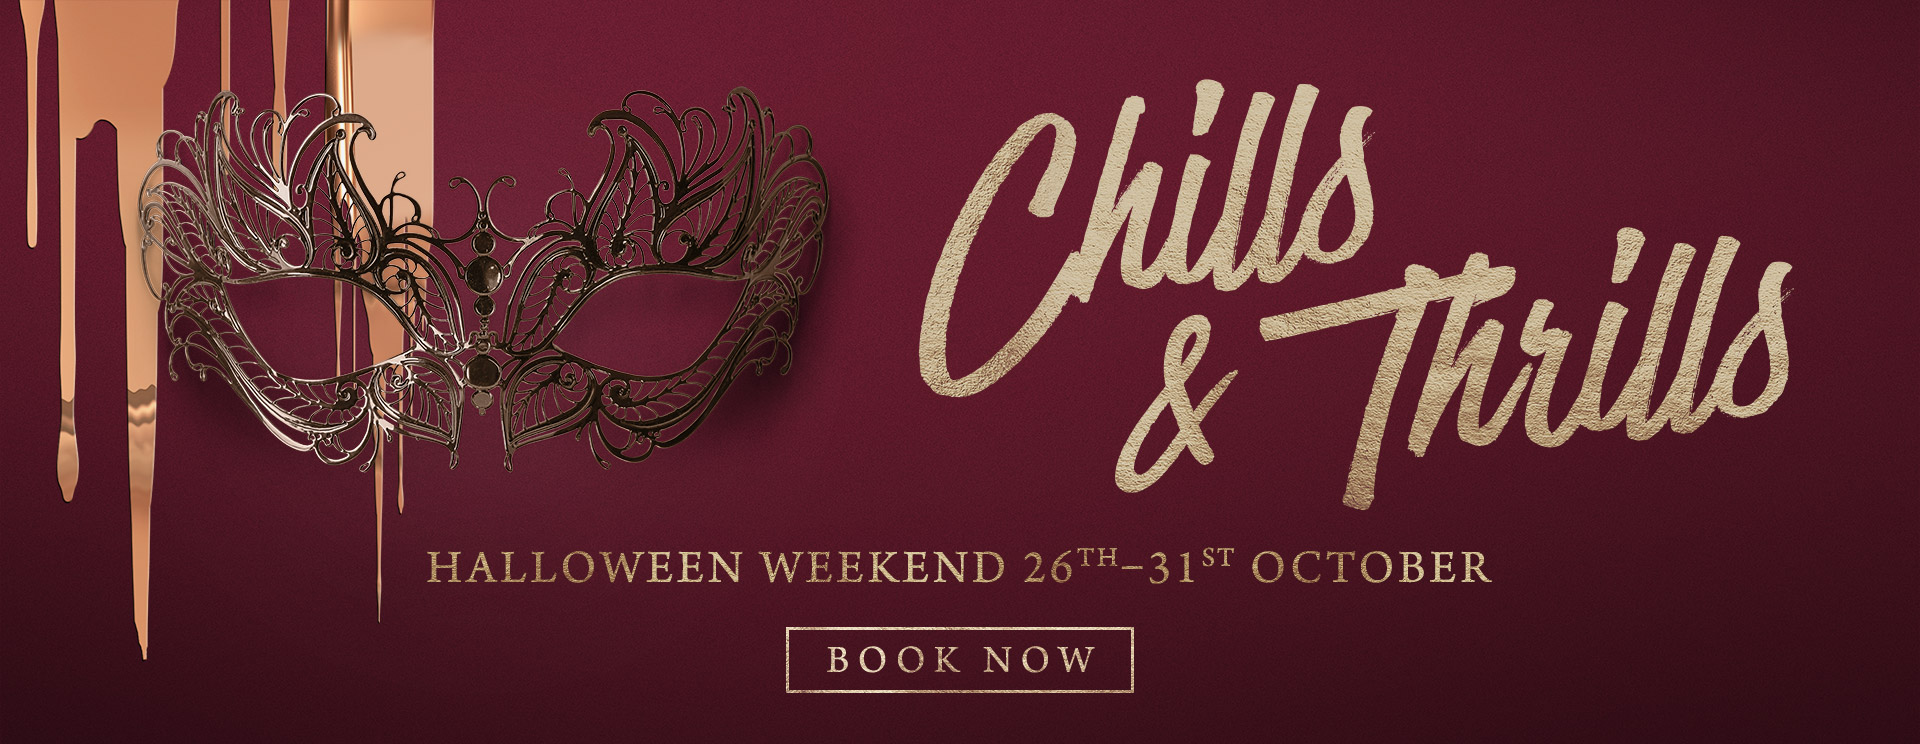 Chills & Thrills this Halloween at The Golden Heart